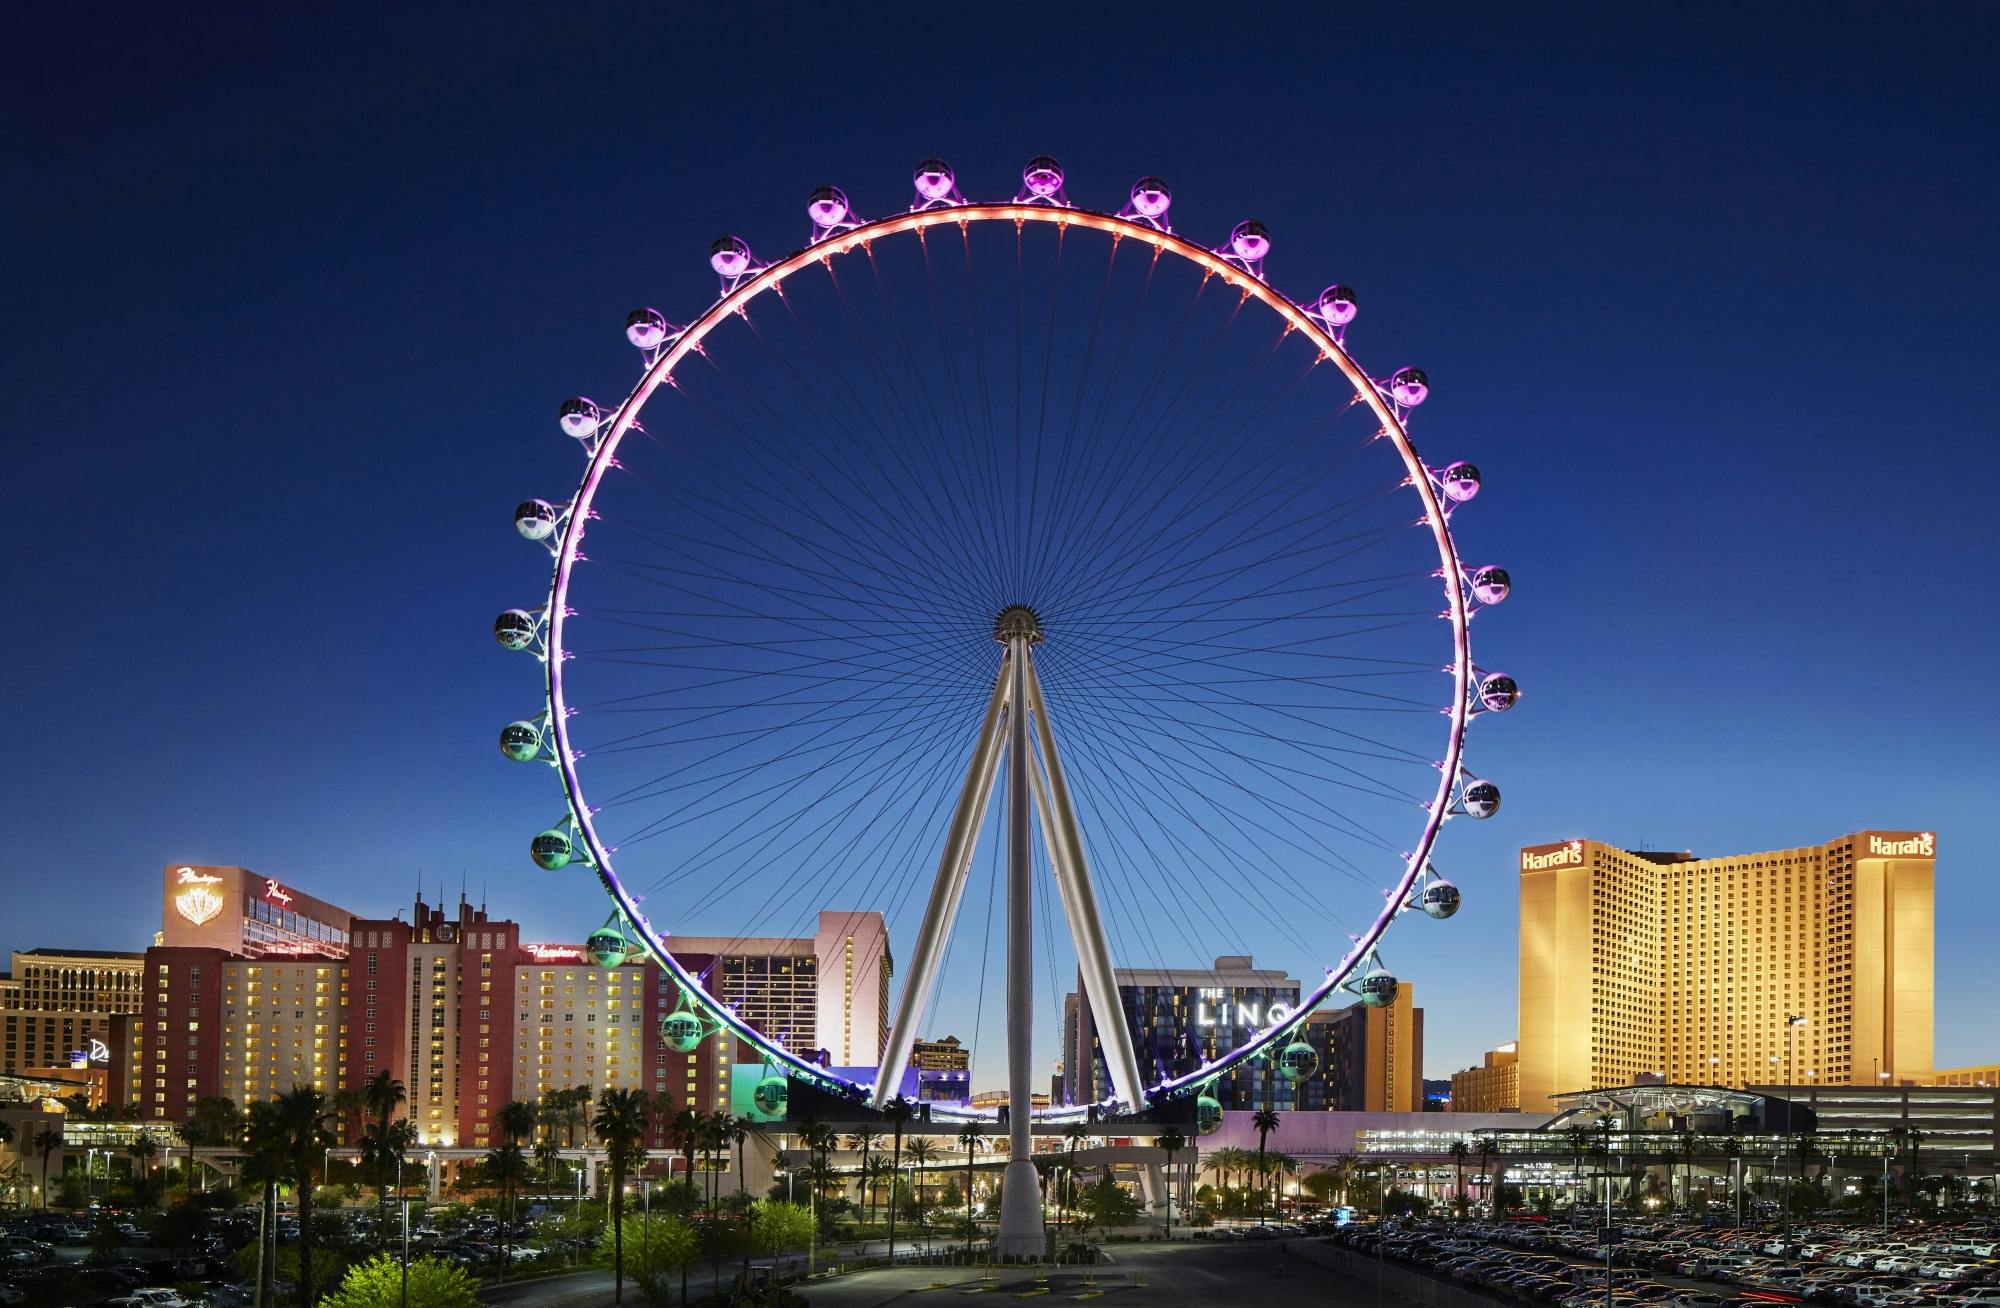 The High Roller Observation Wheel bei The LINQ Tickets